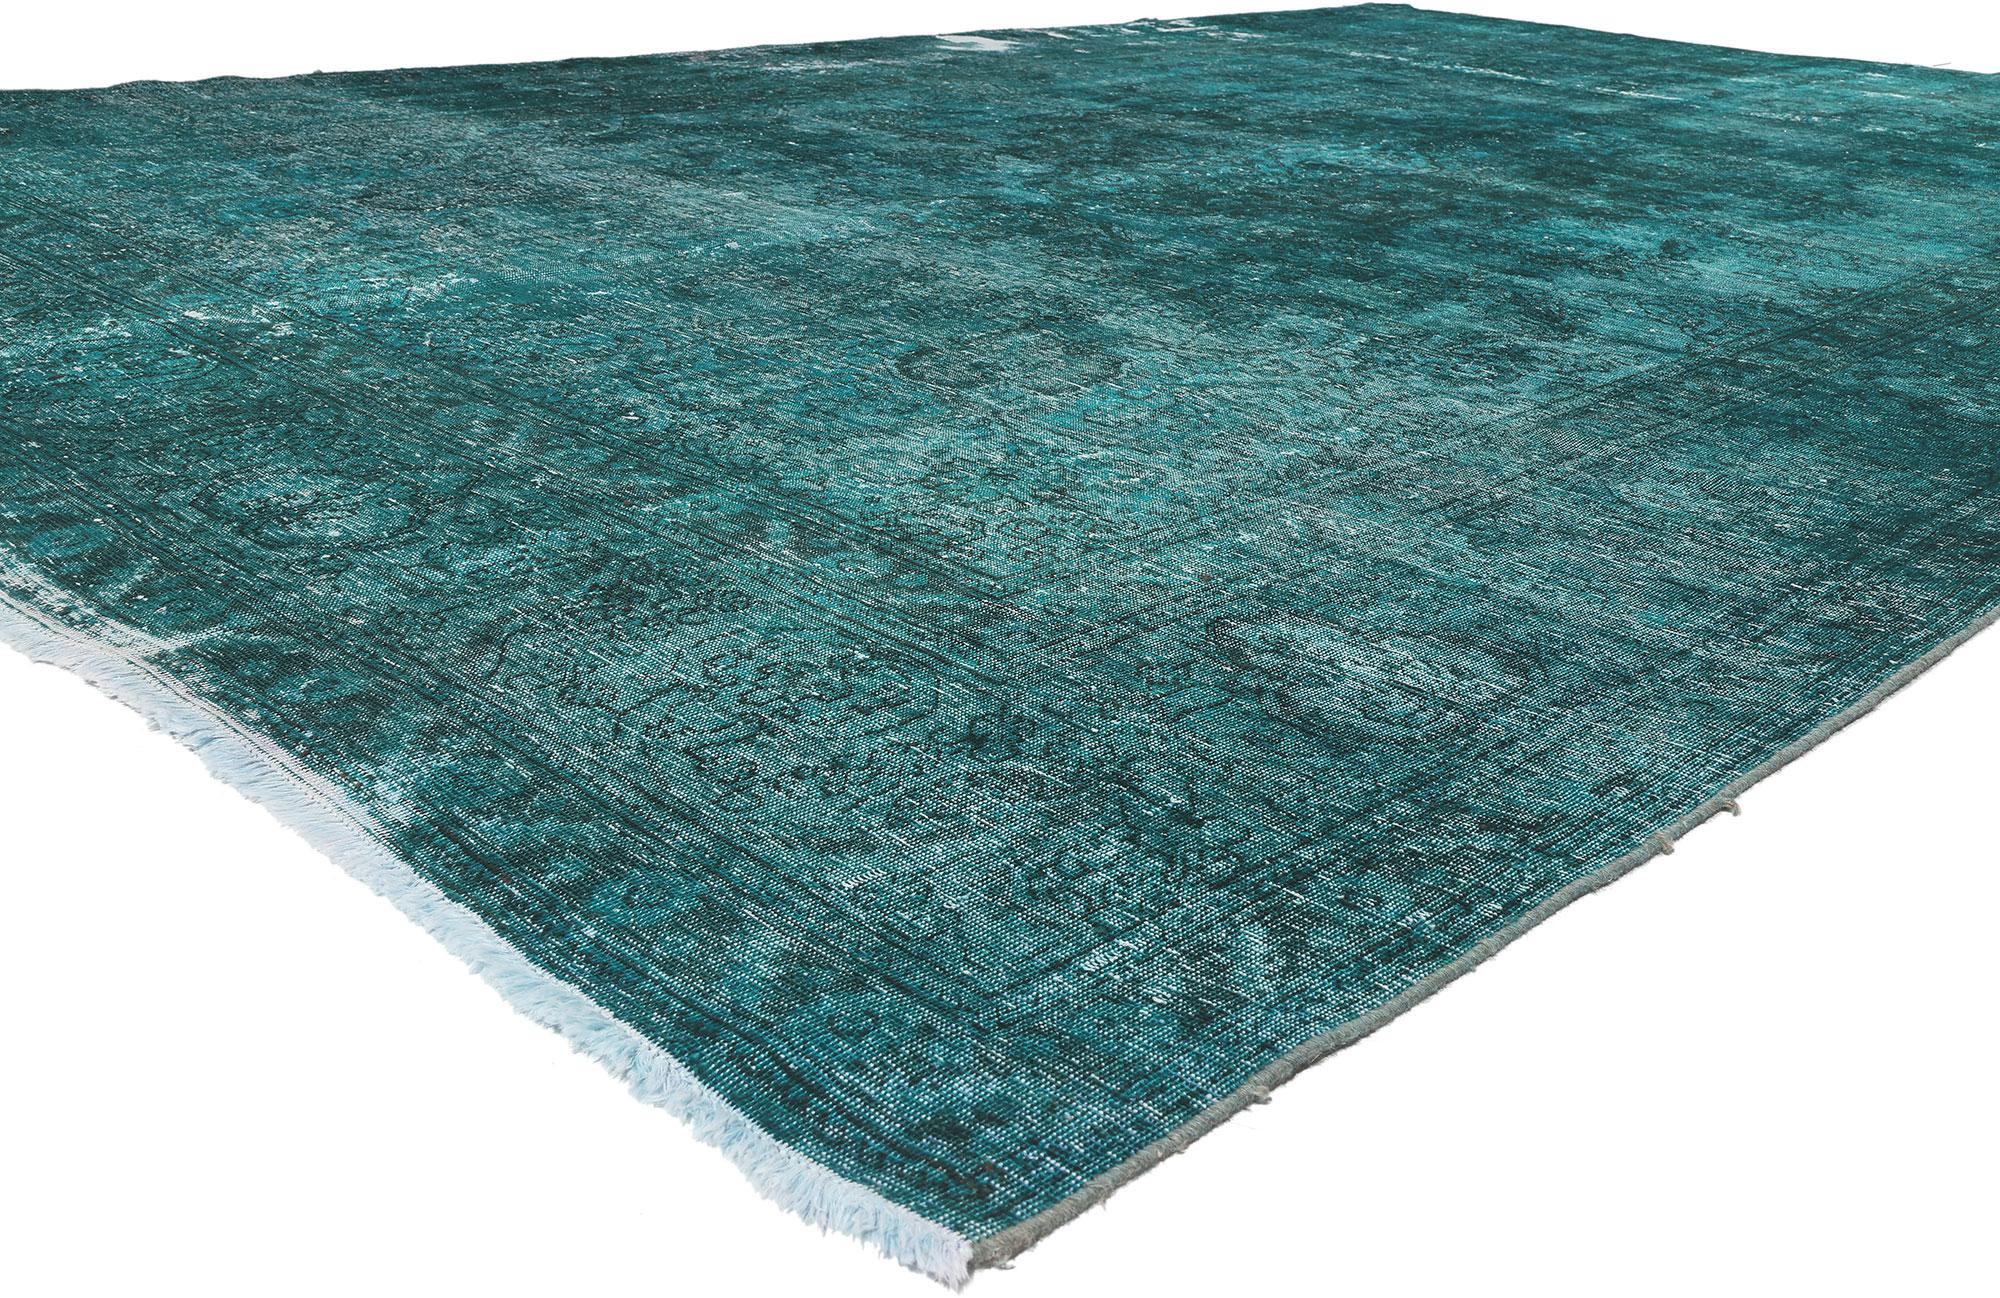 78584 Vintage Persian Teal Overdyed Rug, 10'11 x 16'09. Vintage charm meets eclectic modern flair in this vintage Persian overdyed rug. The inconspicuous design and vibrant teal hues infused into this piece work together creating a fashion-forward